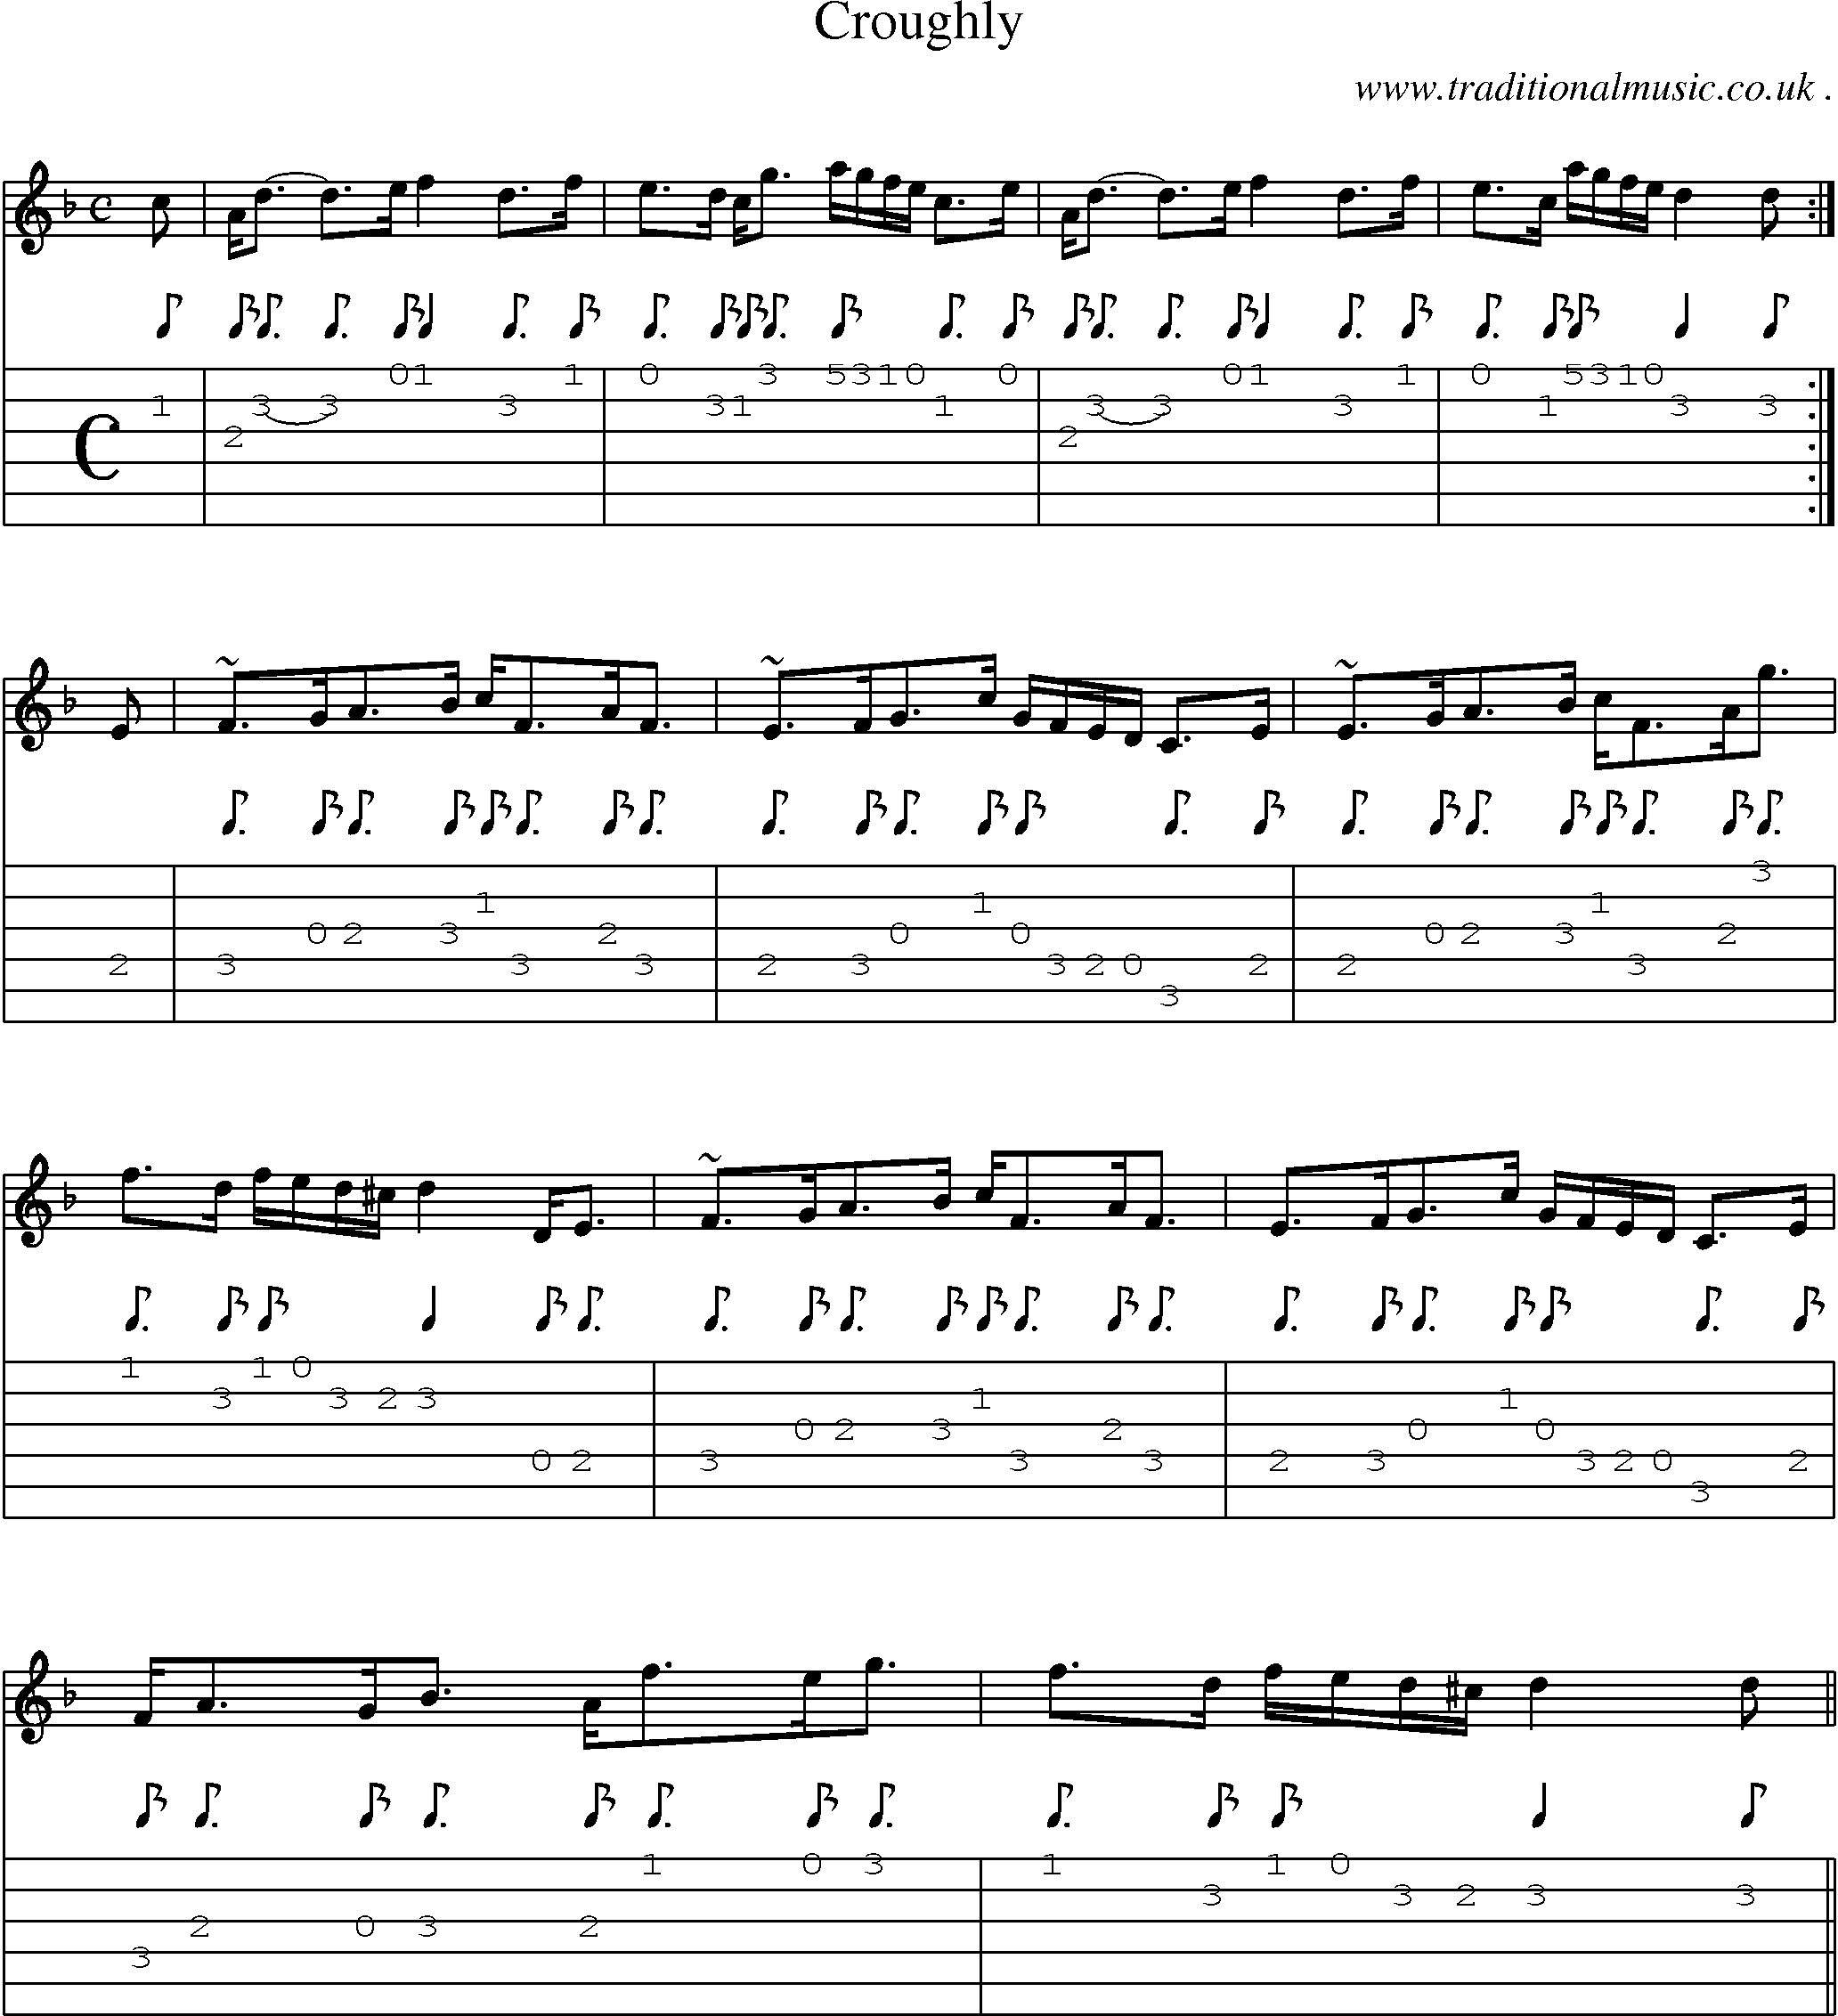 Sheet-music  score, Chords and Guitar Tabs for Croughly